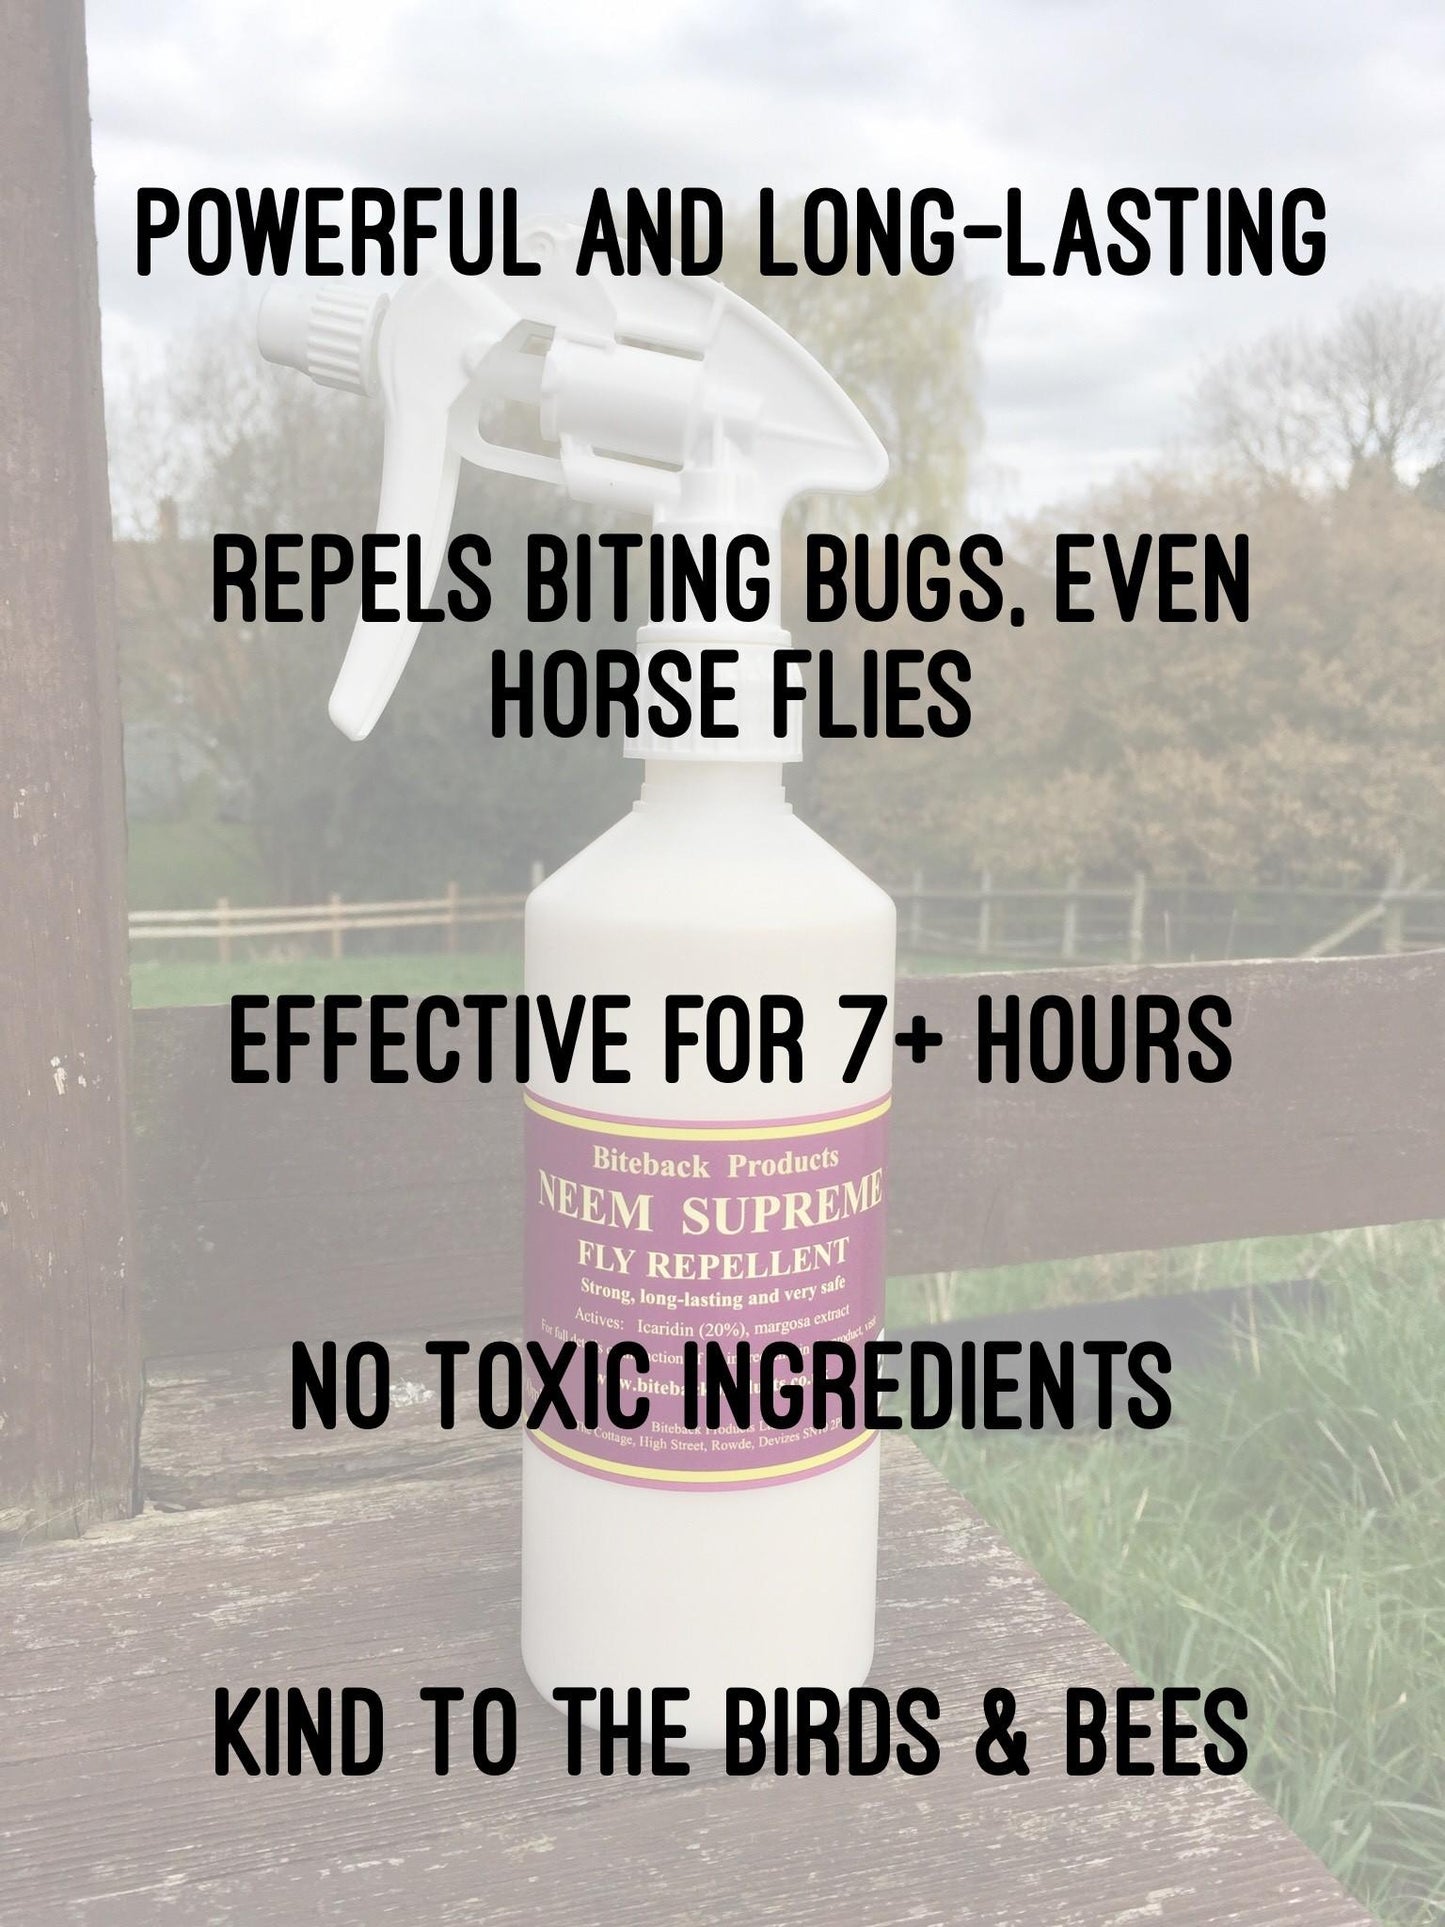 Neem Supreme repels midges, horse flies, as well as being a tick repellent